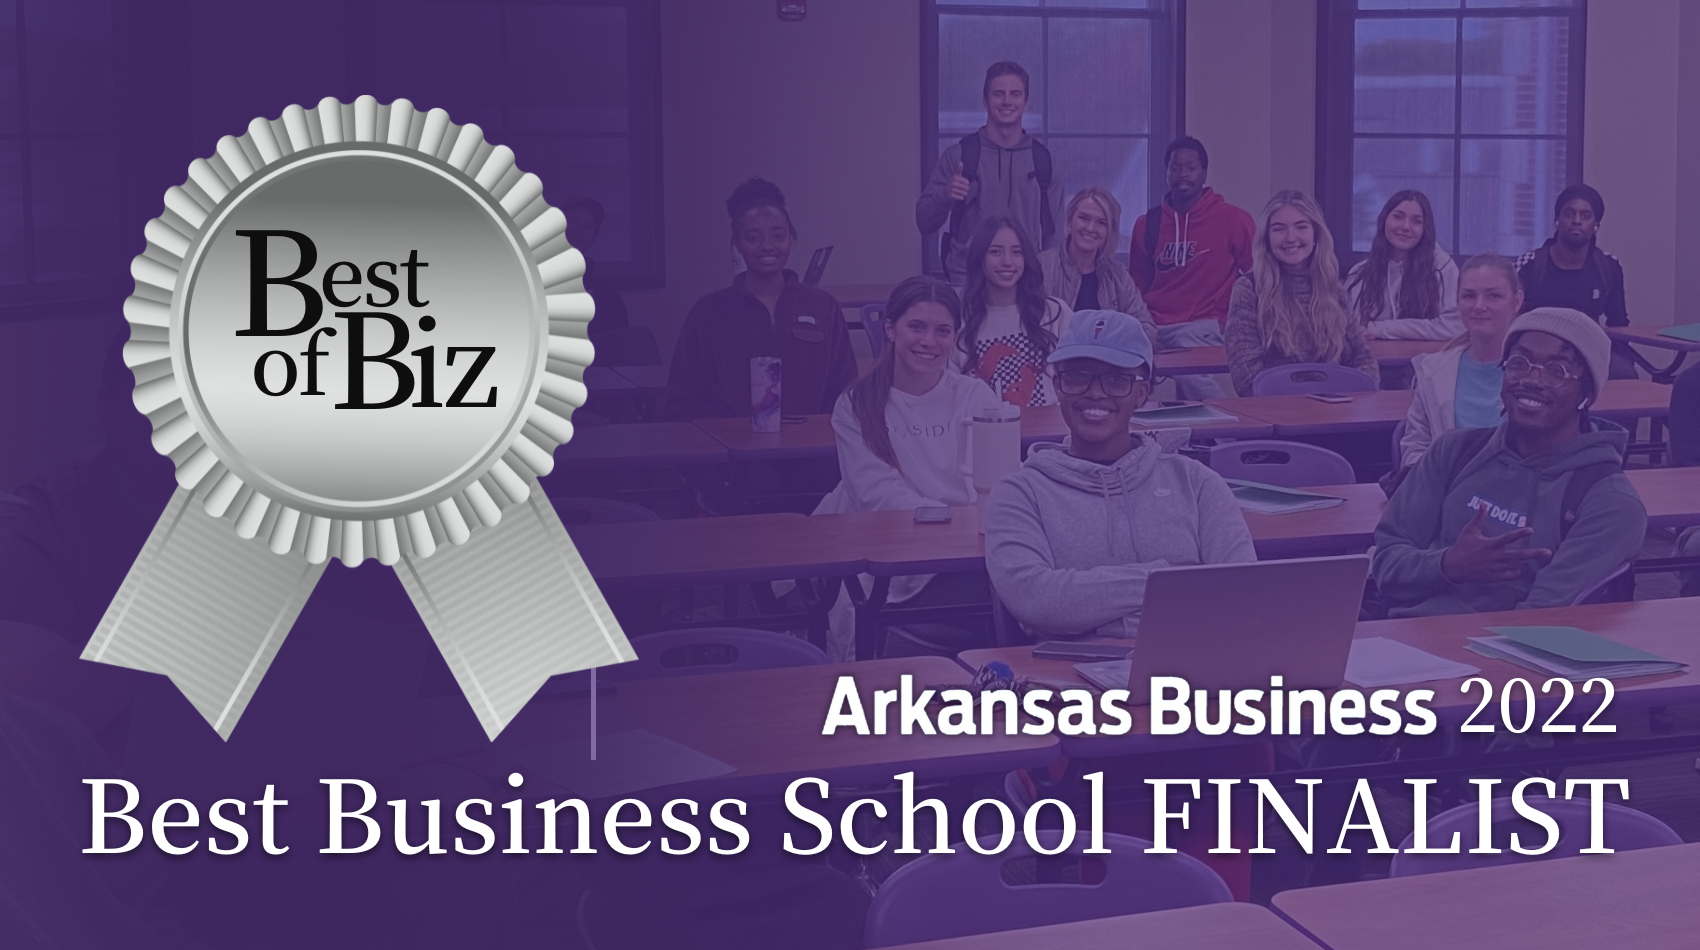 FIND OUT WHY WE WERE VOTED BEST OF BIZ